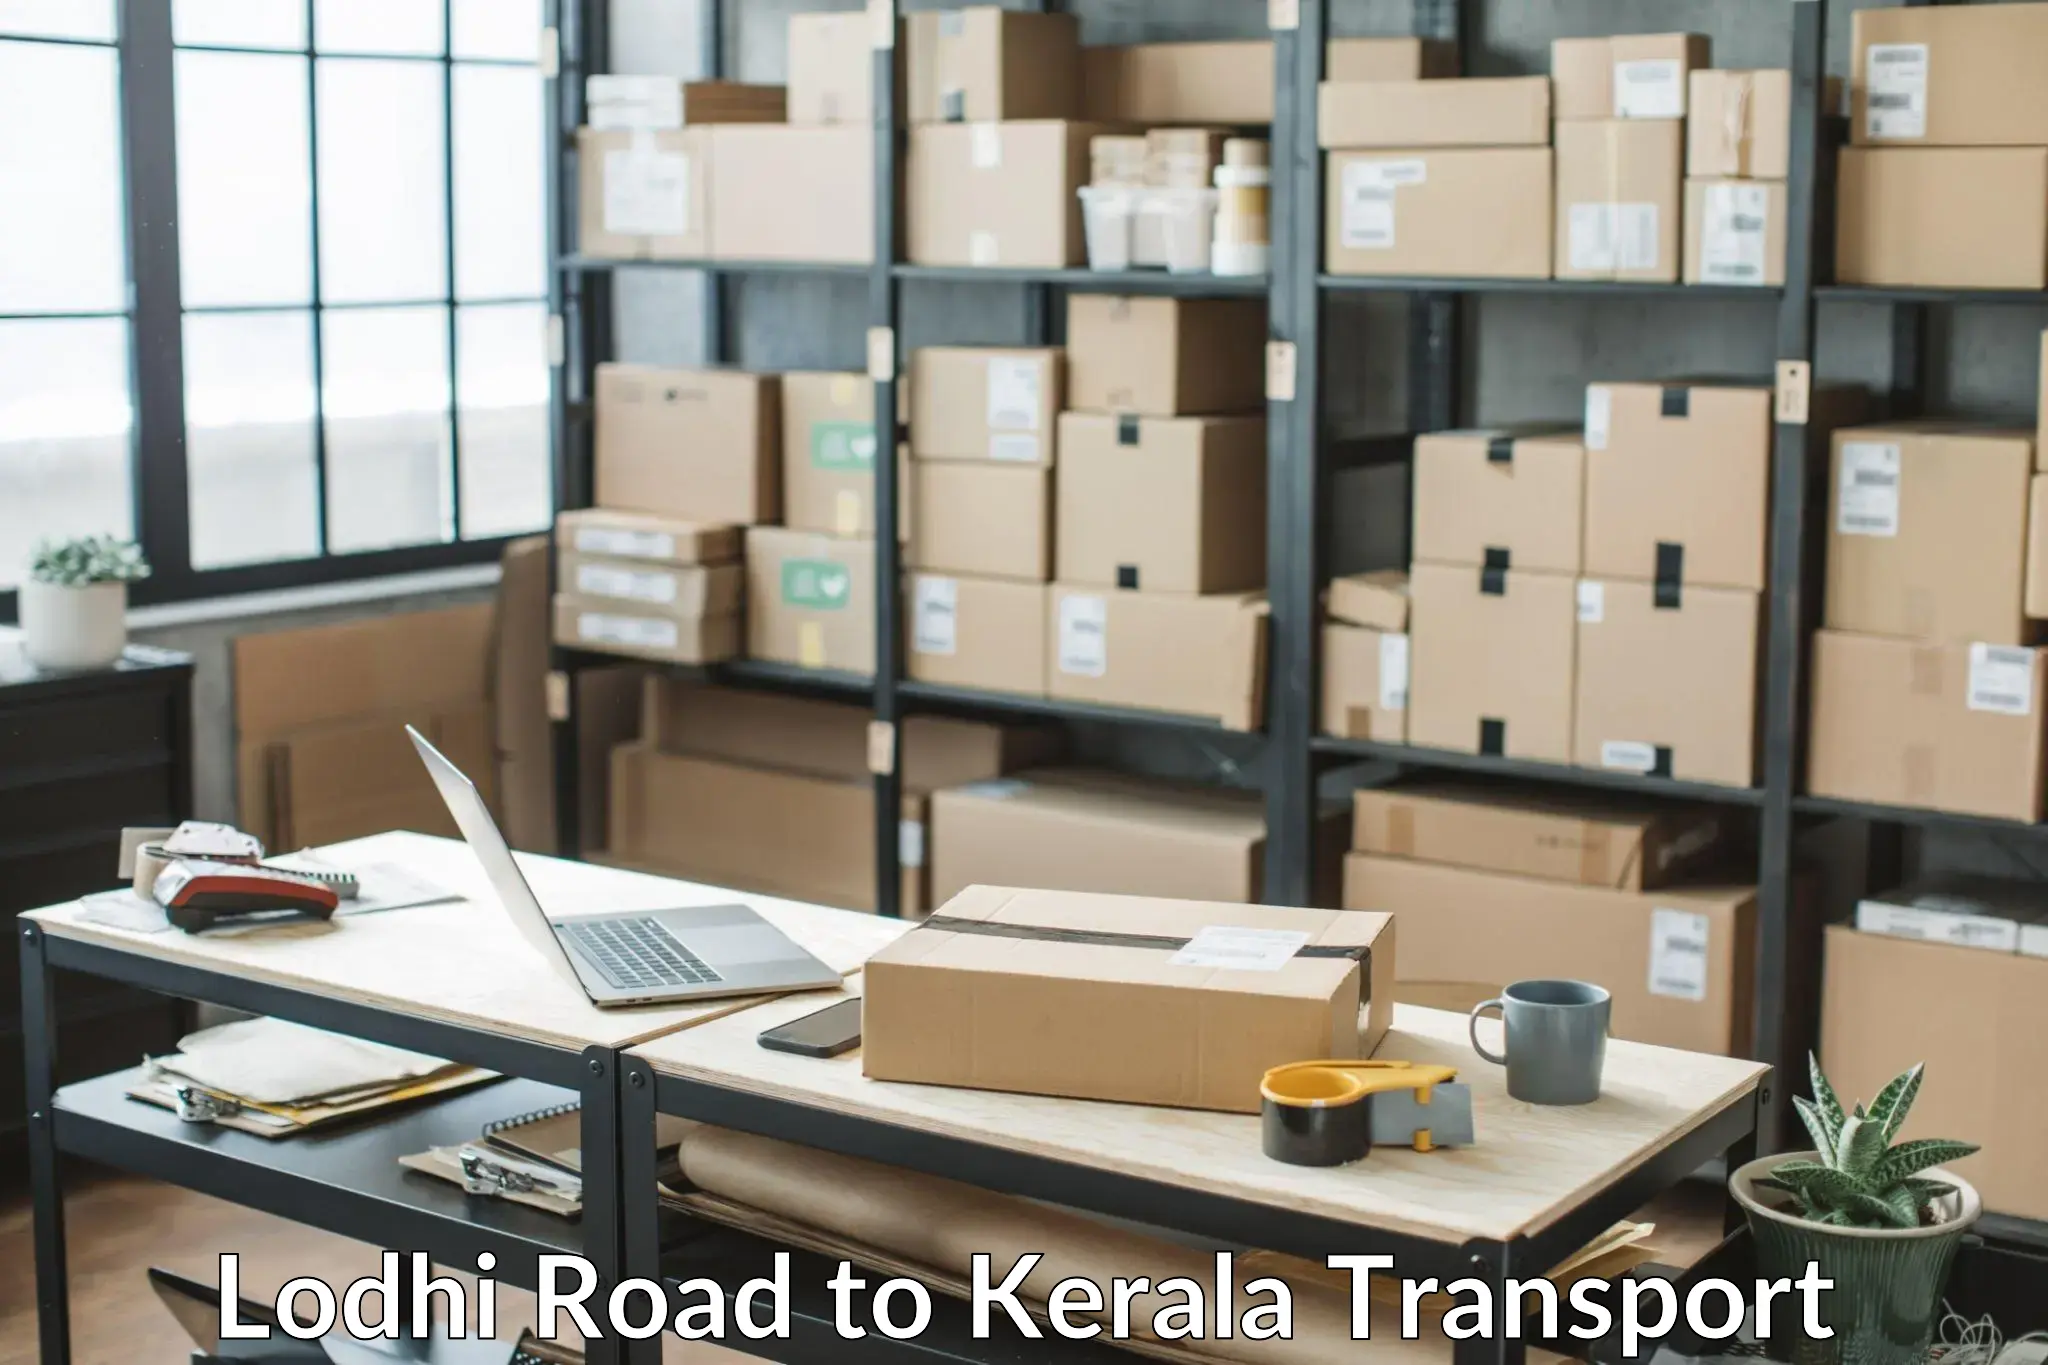 Commercial transport service Lodhi Road to Cochin